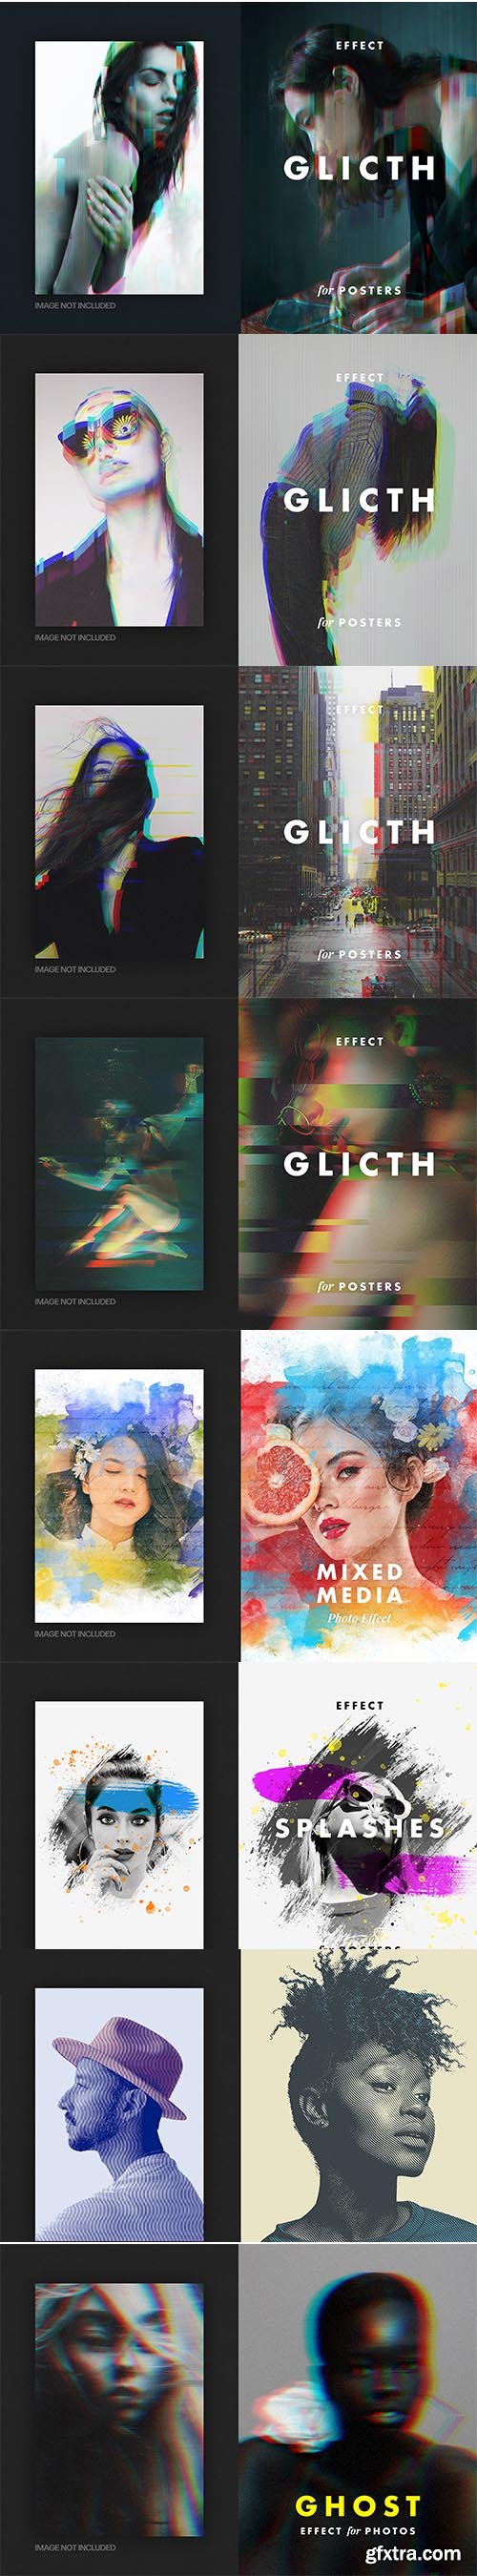 Glitch noise photo effect for poster format